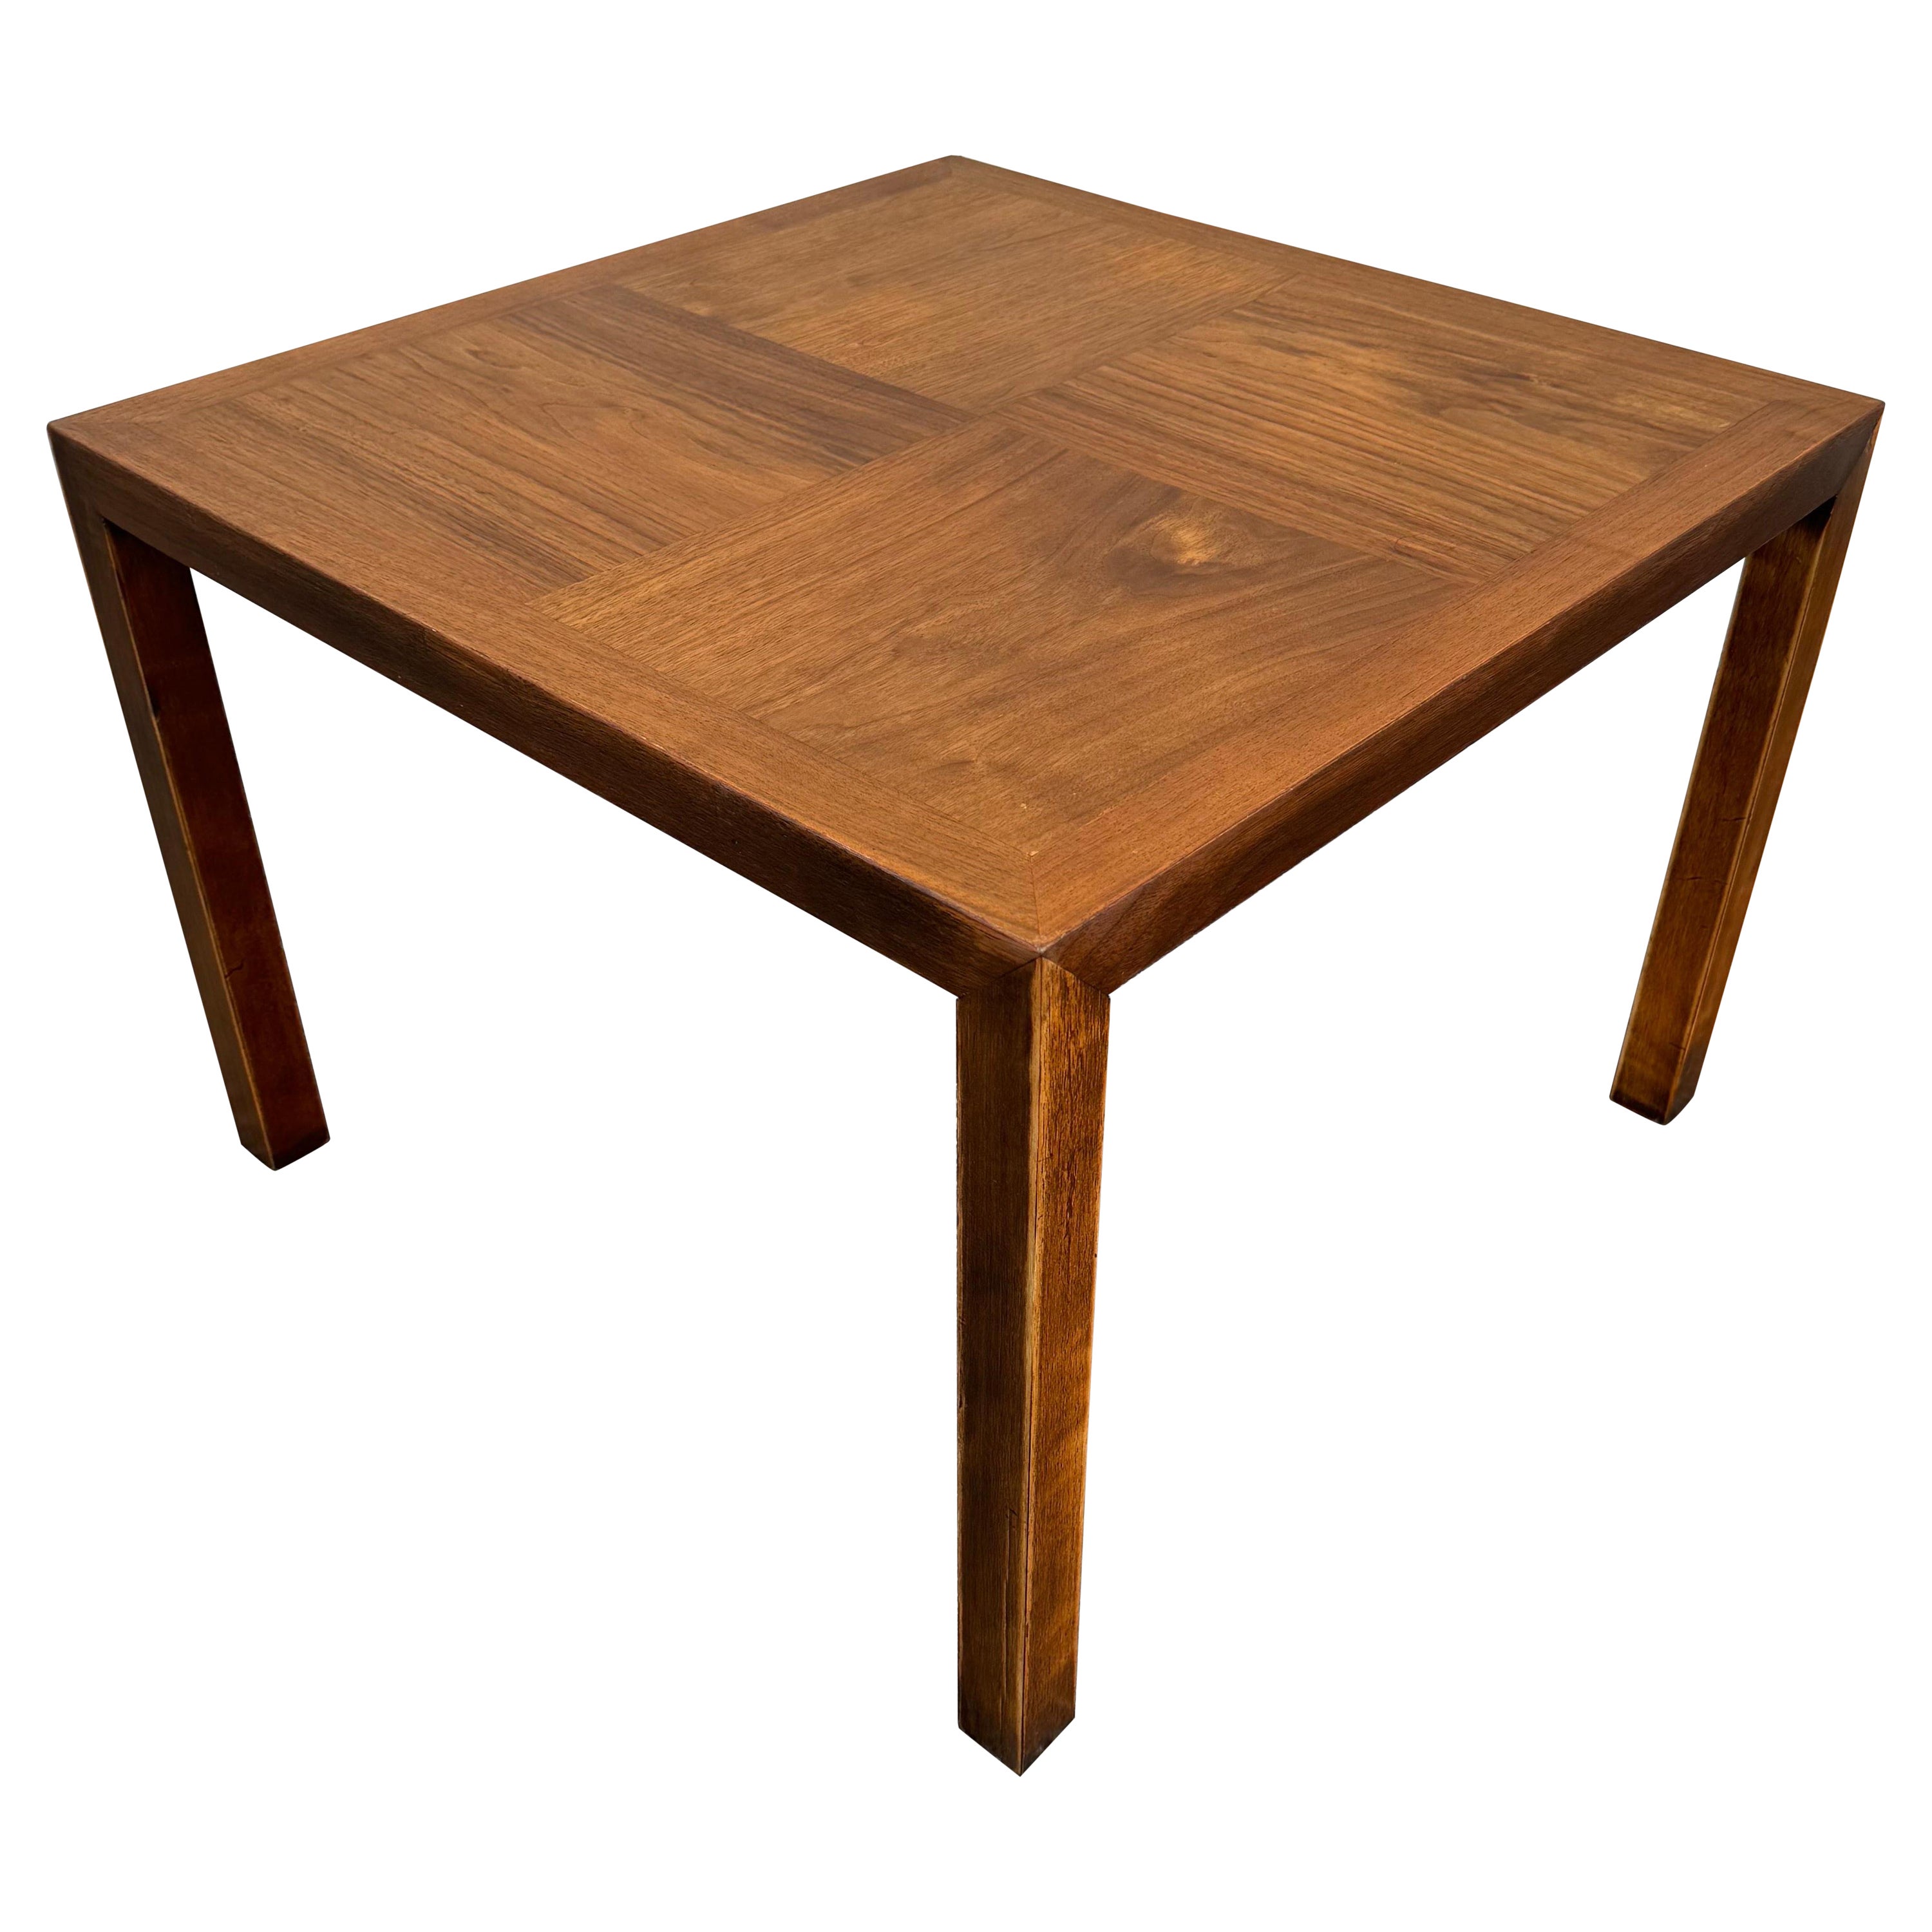 1960's Mid Century Modern Lane Furniture Coffee Table For Sale